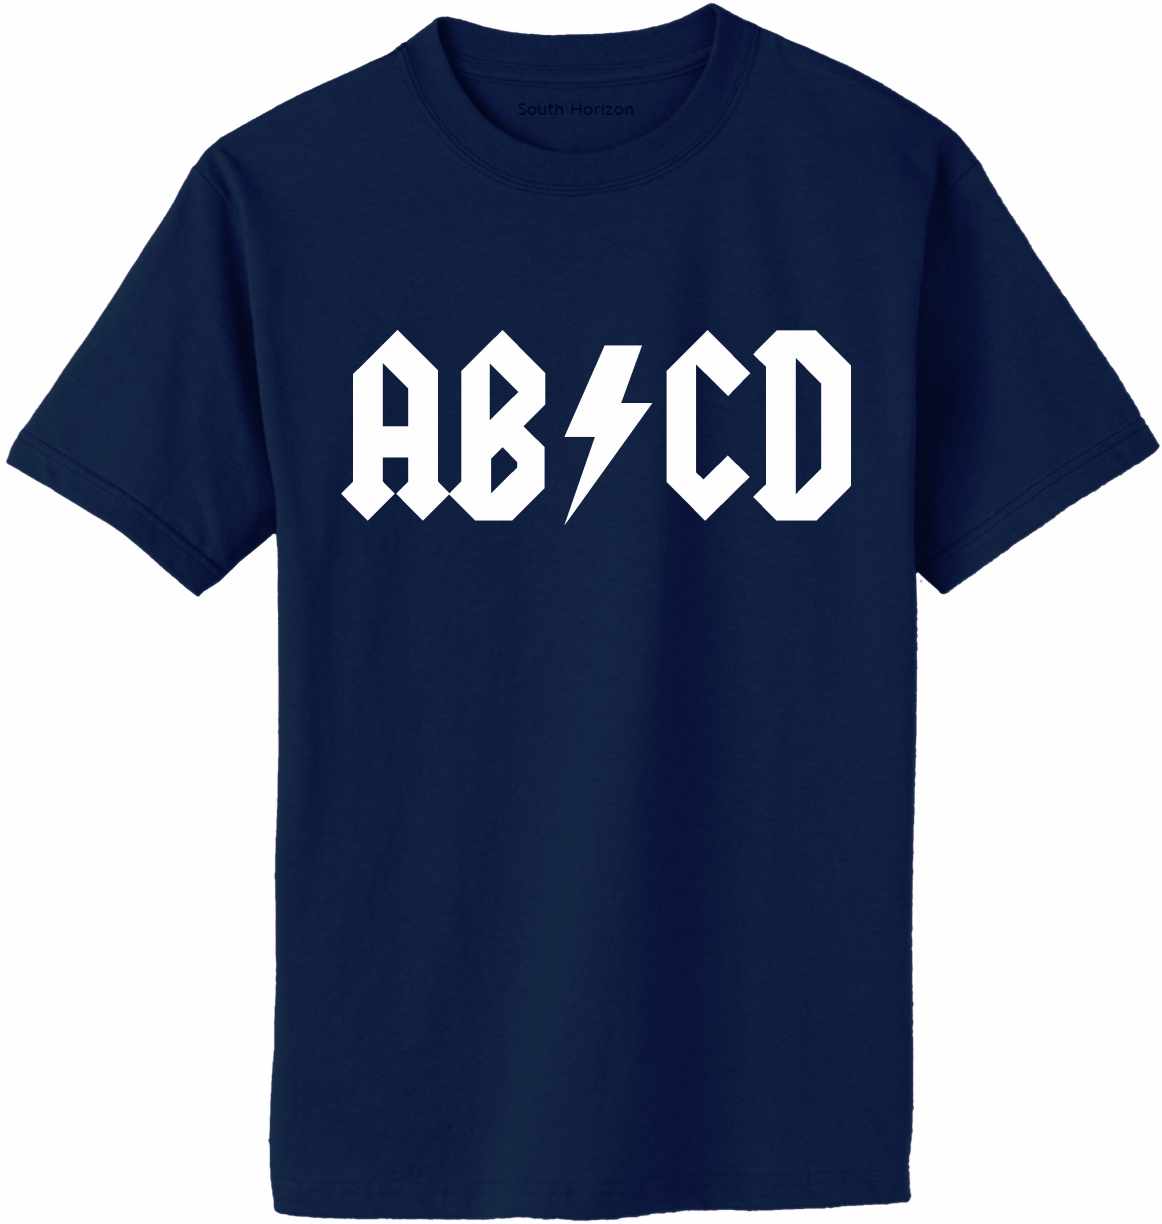 ABCD Adult T-Shirt